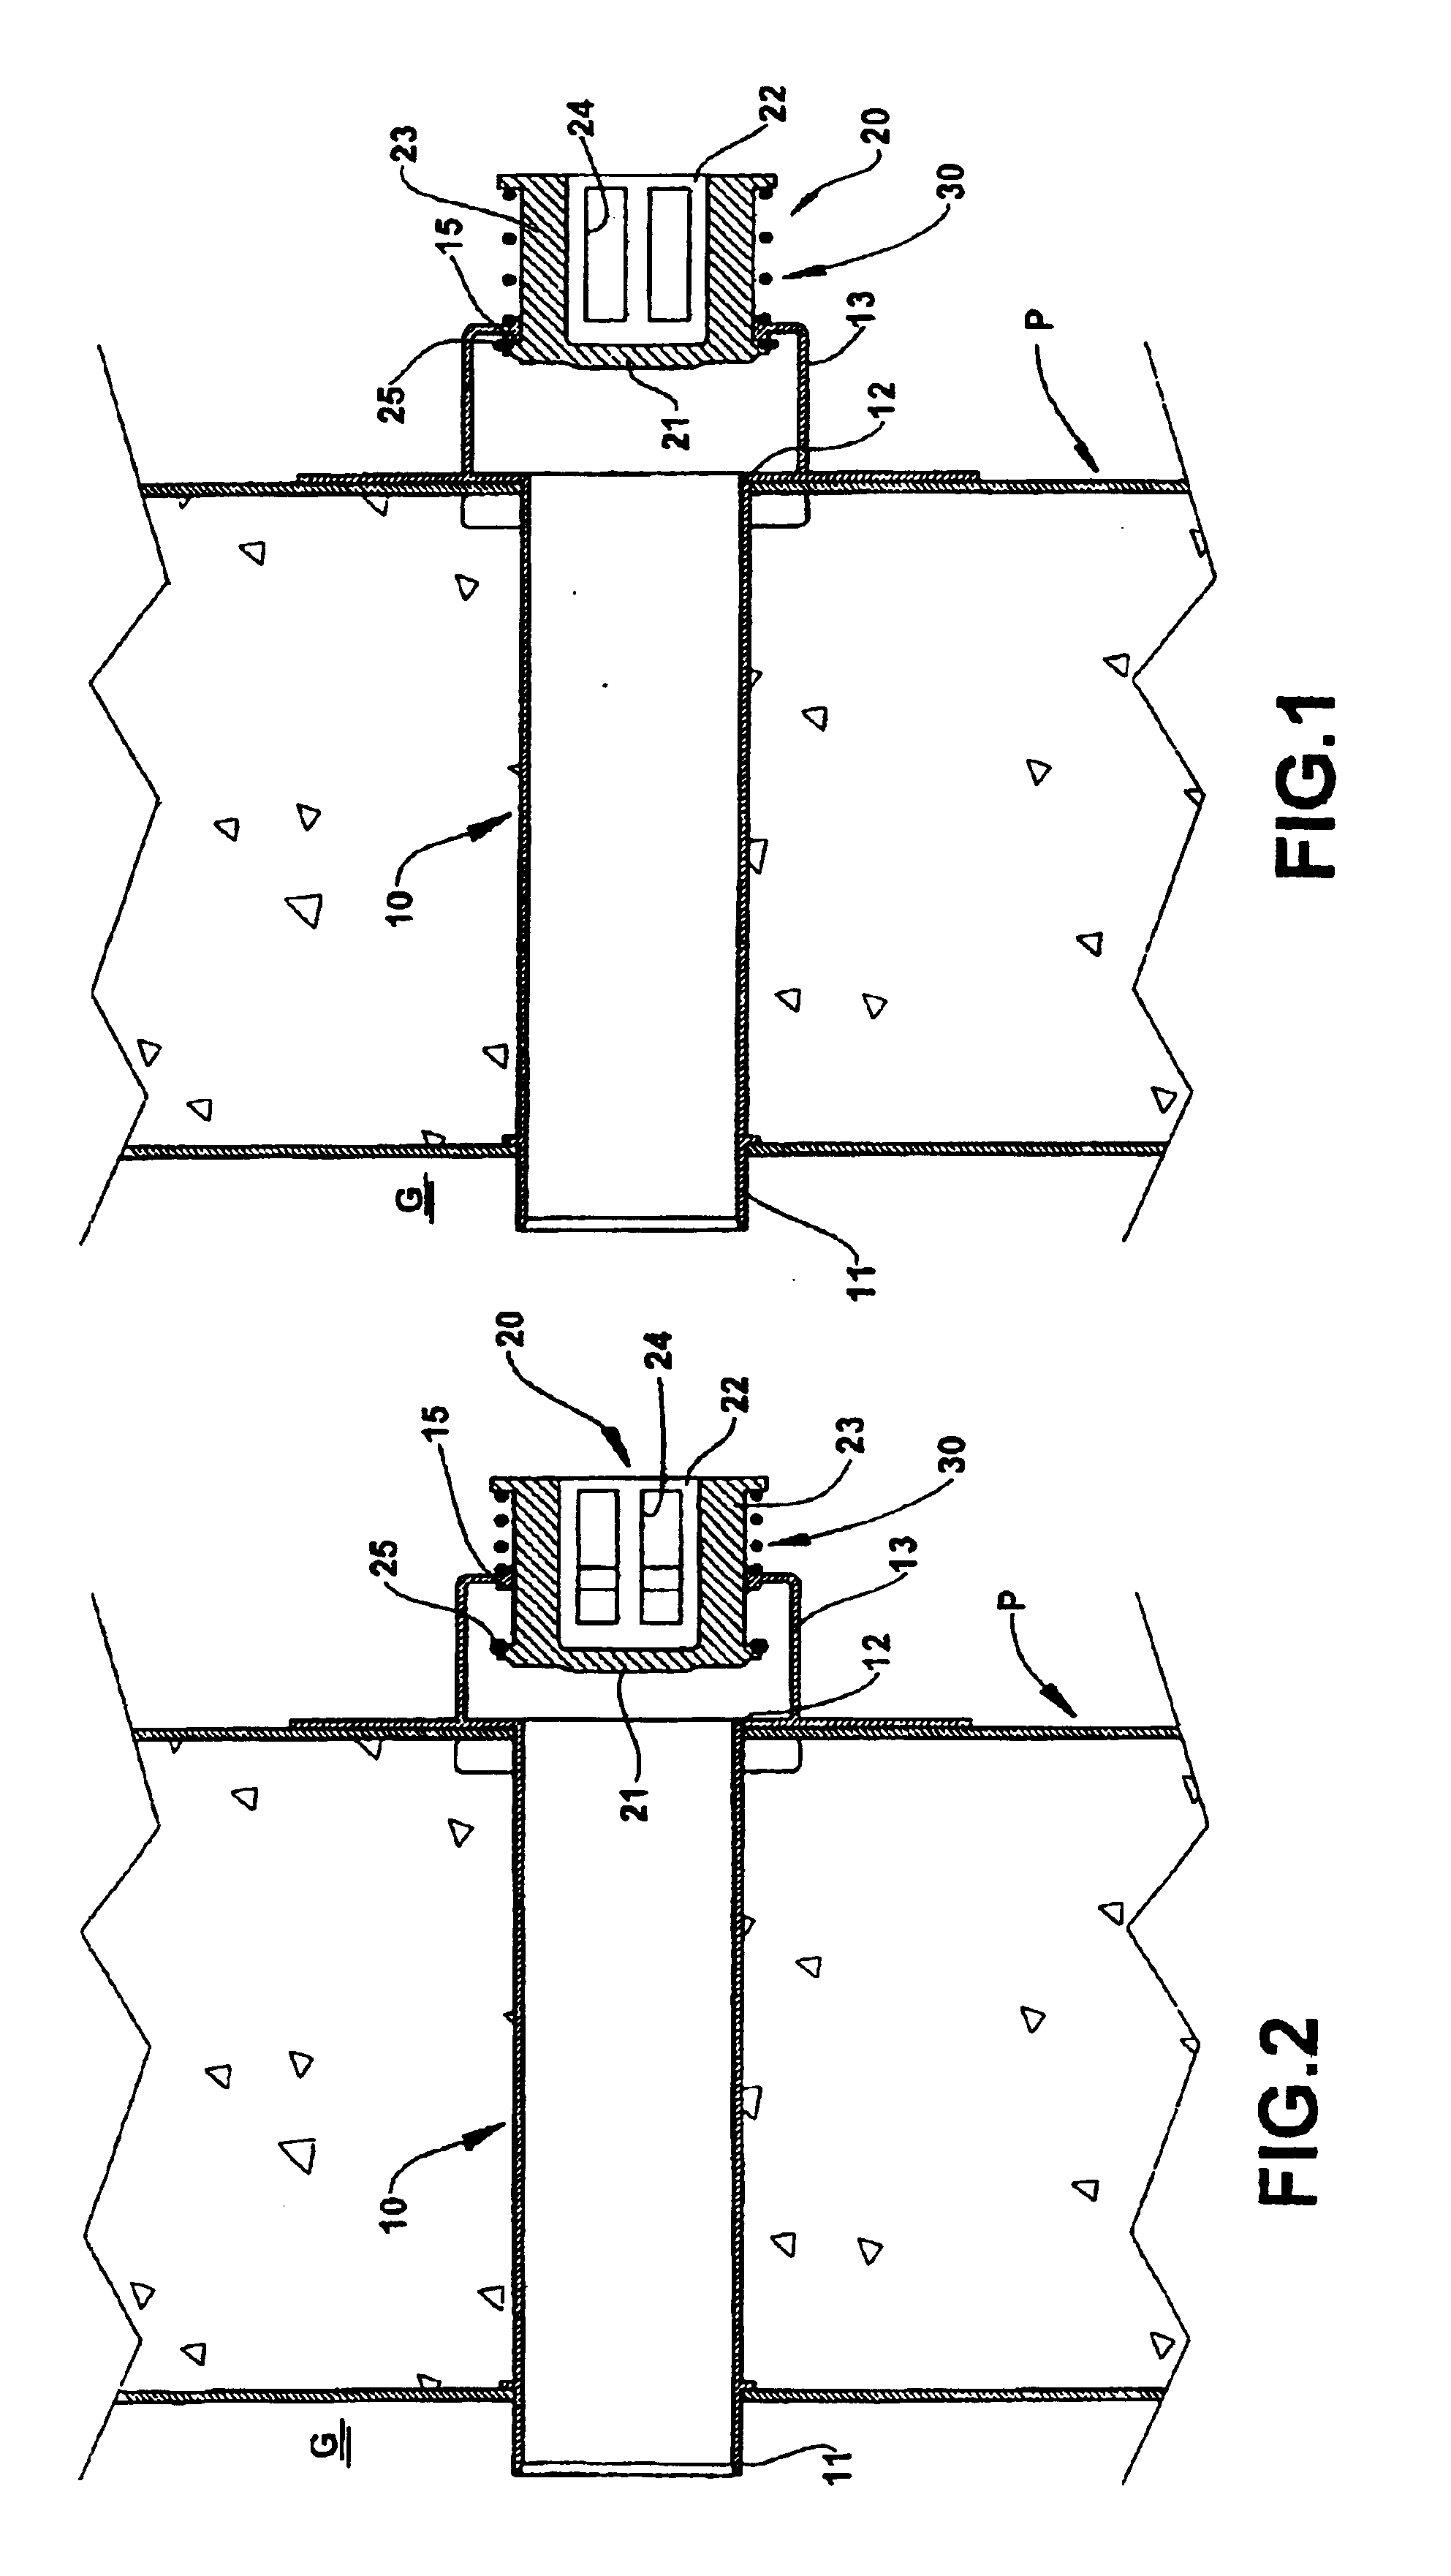 Vacuum-breaking valve for a refrigerated compartment